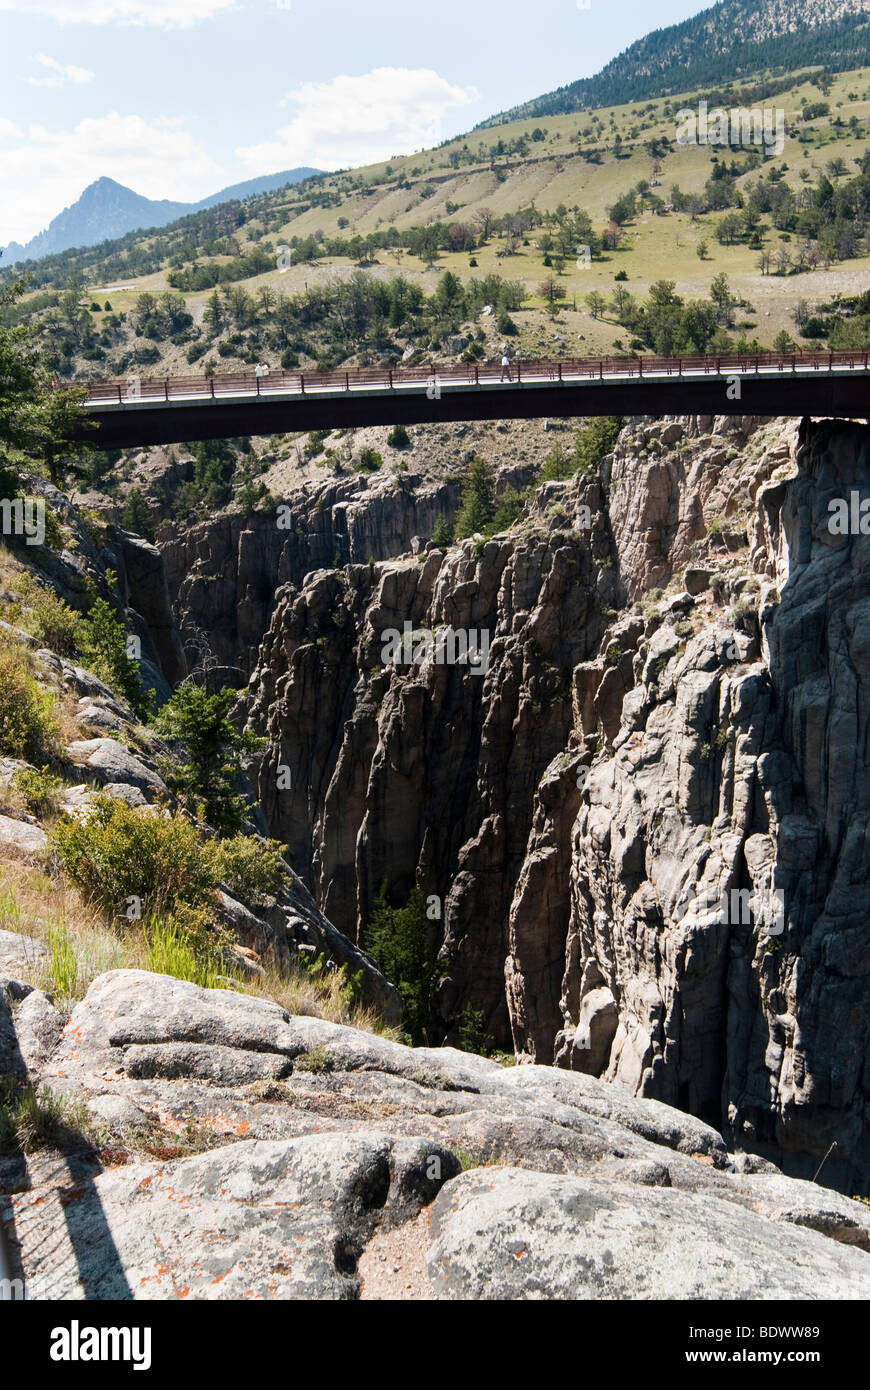 Bridge across the Sunlight Creek Gorge along the Chief Joseph Scenic Byway in Wyoming Stock Photo